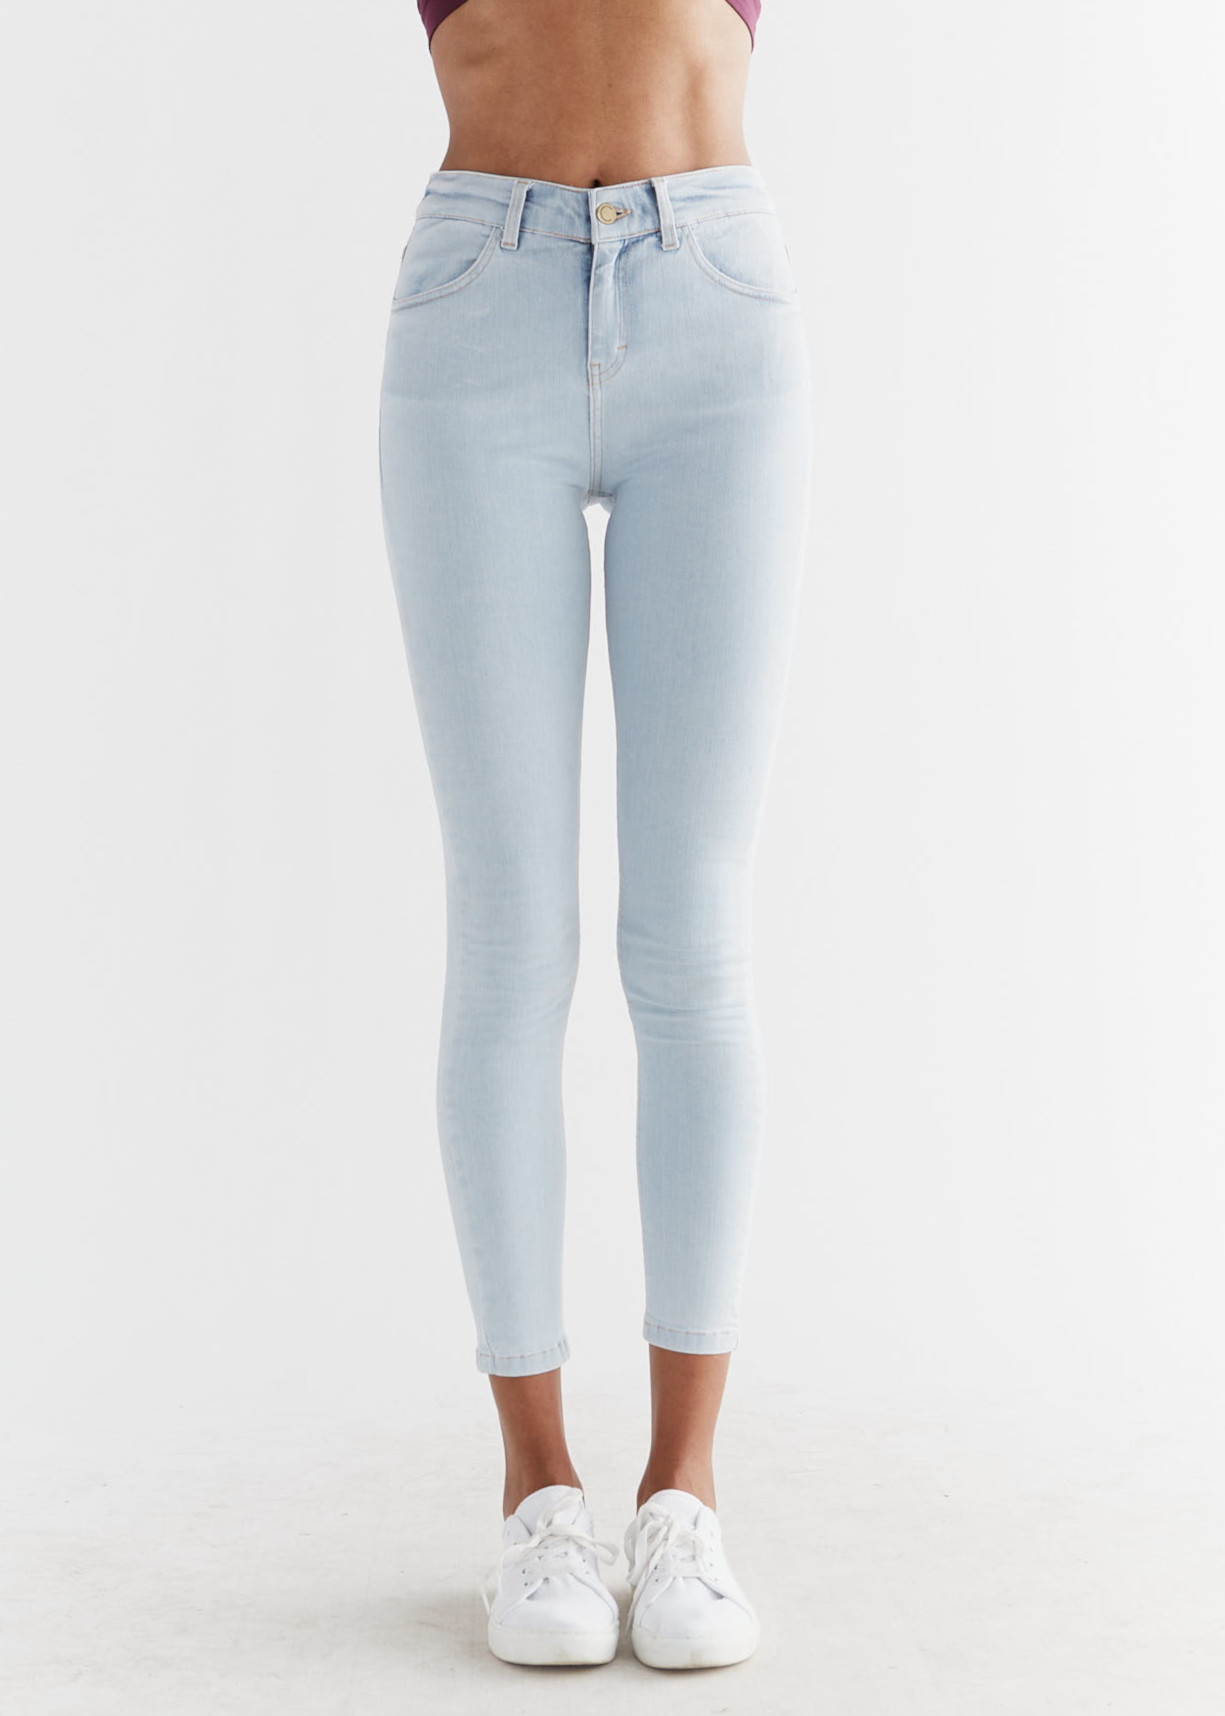 Jeans donna Skinny Fit, Ice Blue in cotone biologico